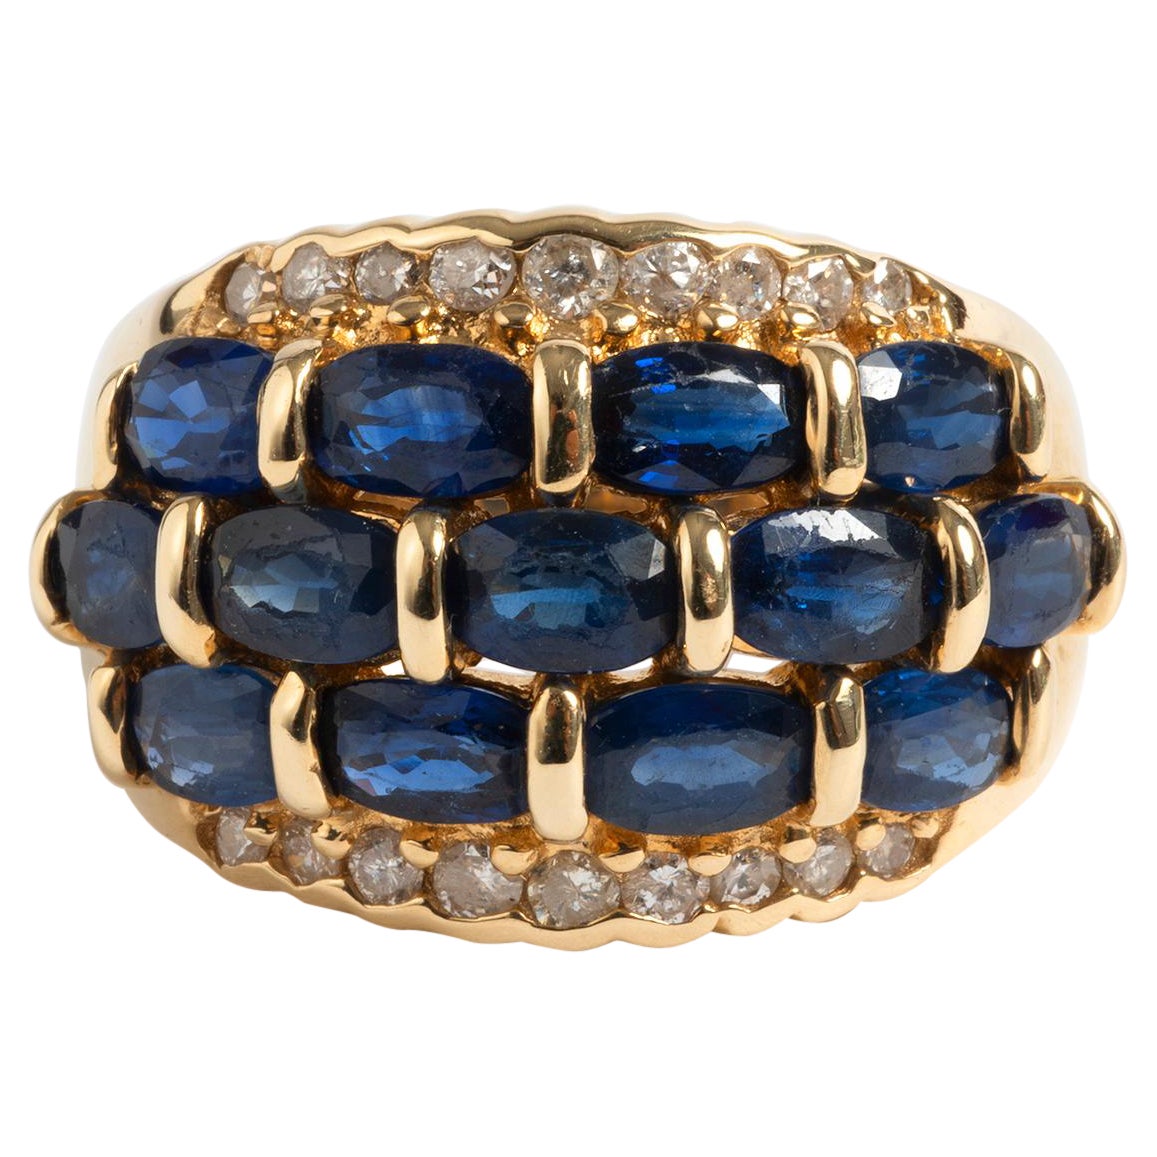 Glamorous 14 Carat Yellow Gold Diamond and Sapphire Dress Ring For Sale